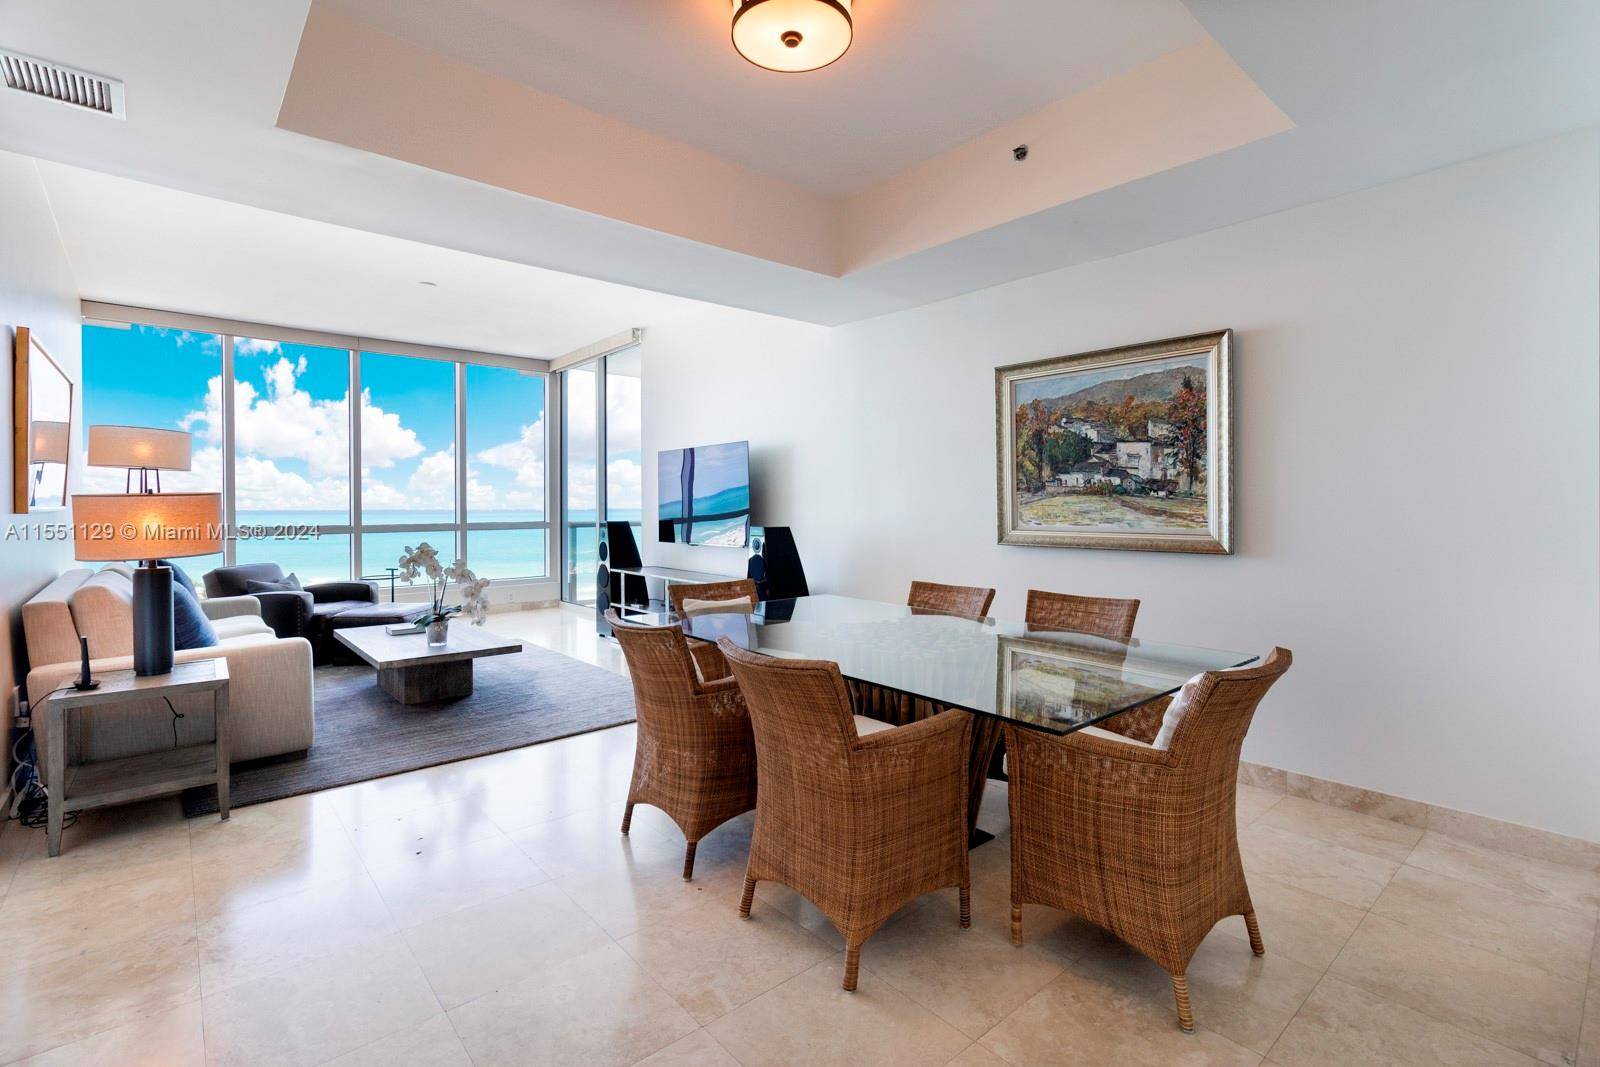 Dreamy views from this direct ocean unit with 2 bedrooms, 2 full bath and guest bath.